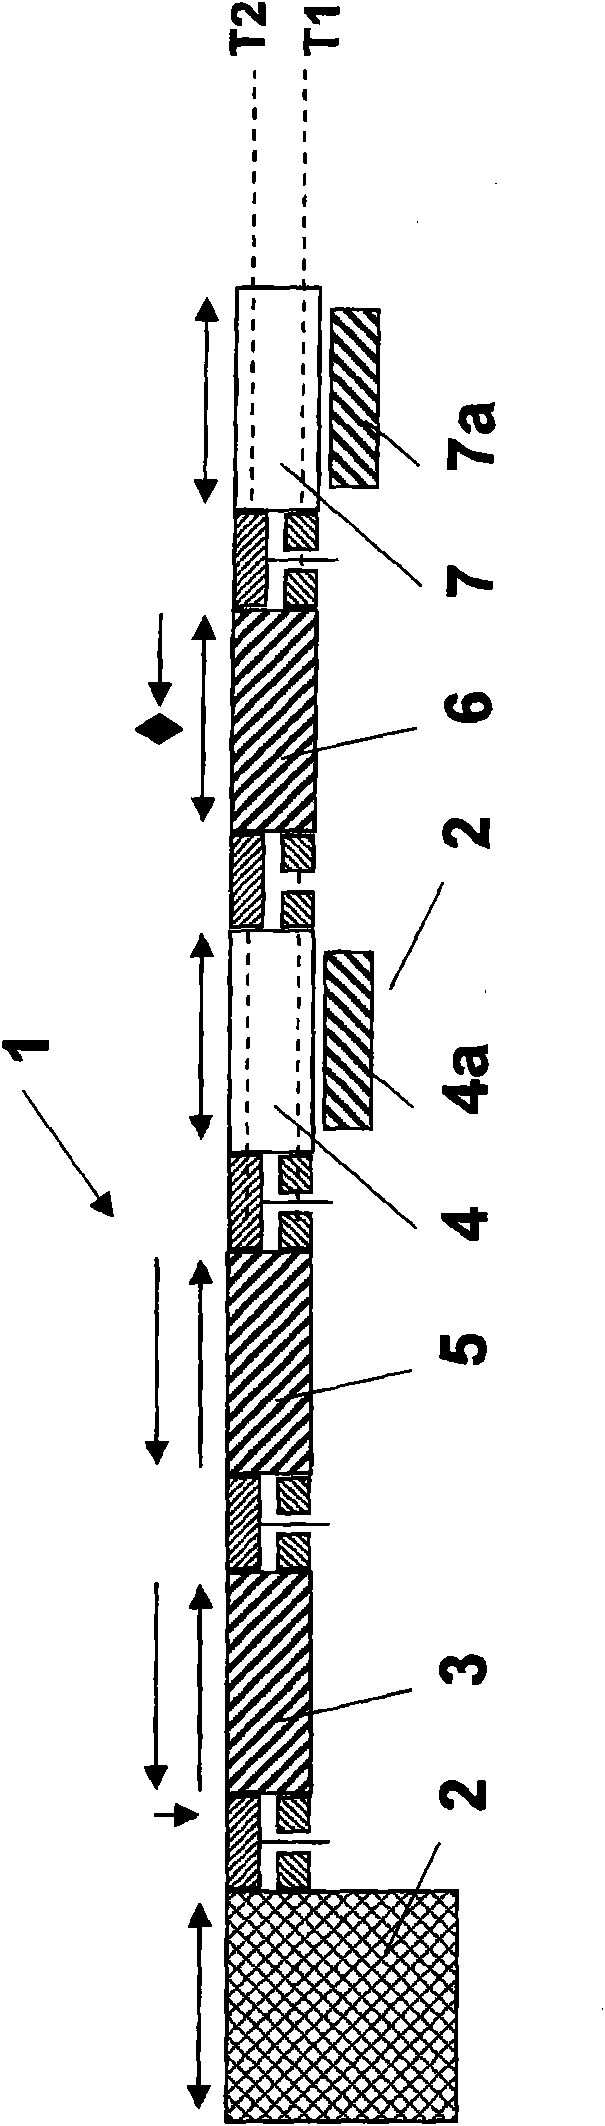 Processing system and method of operating a processing system